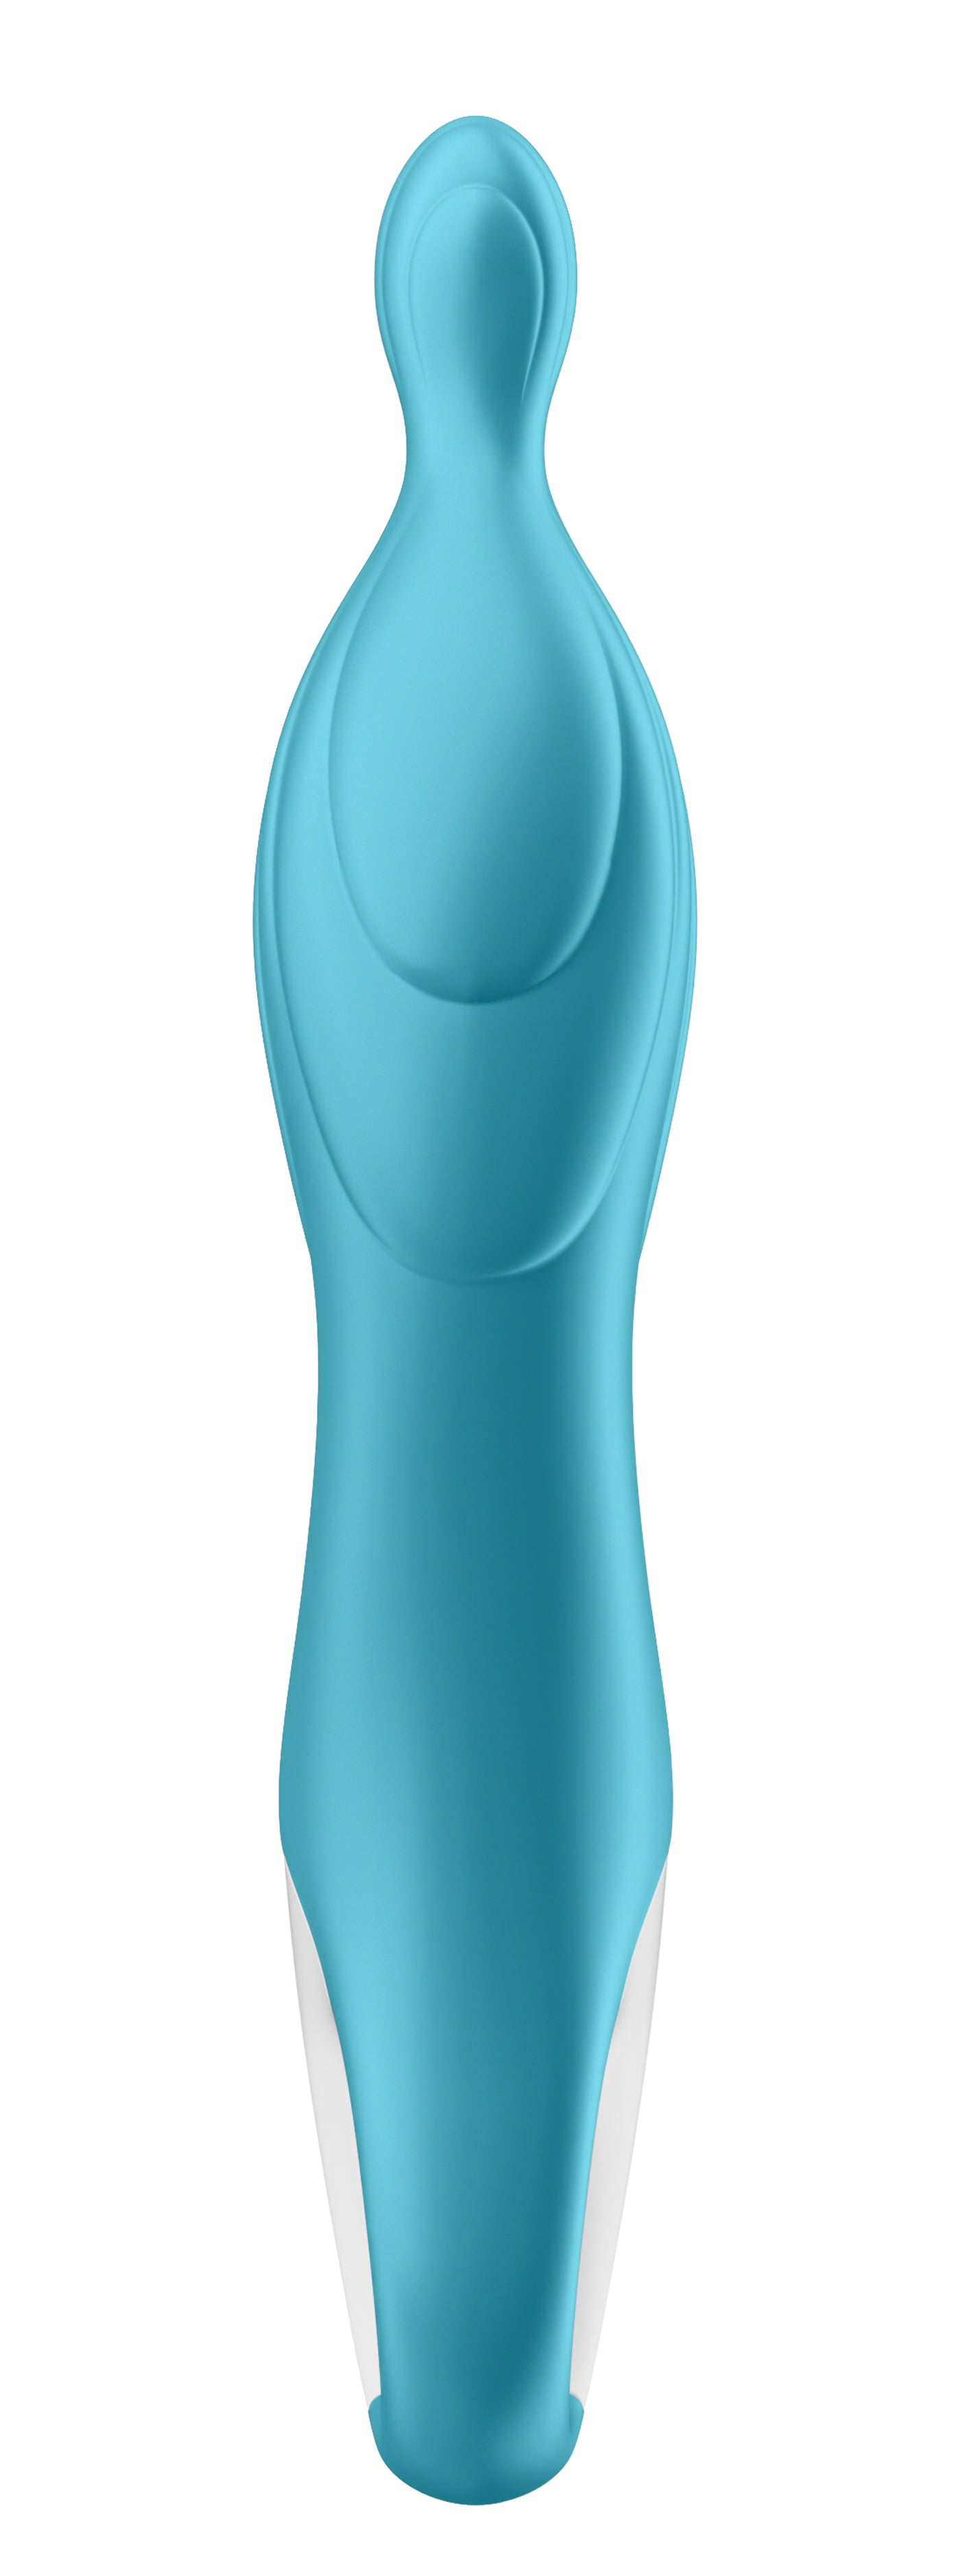 A-Mazing 2 a-Spot Vibrator - Turquoise Turquoise-2